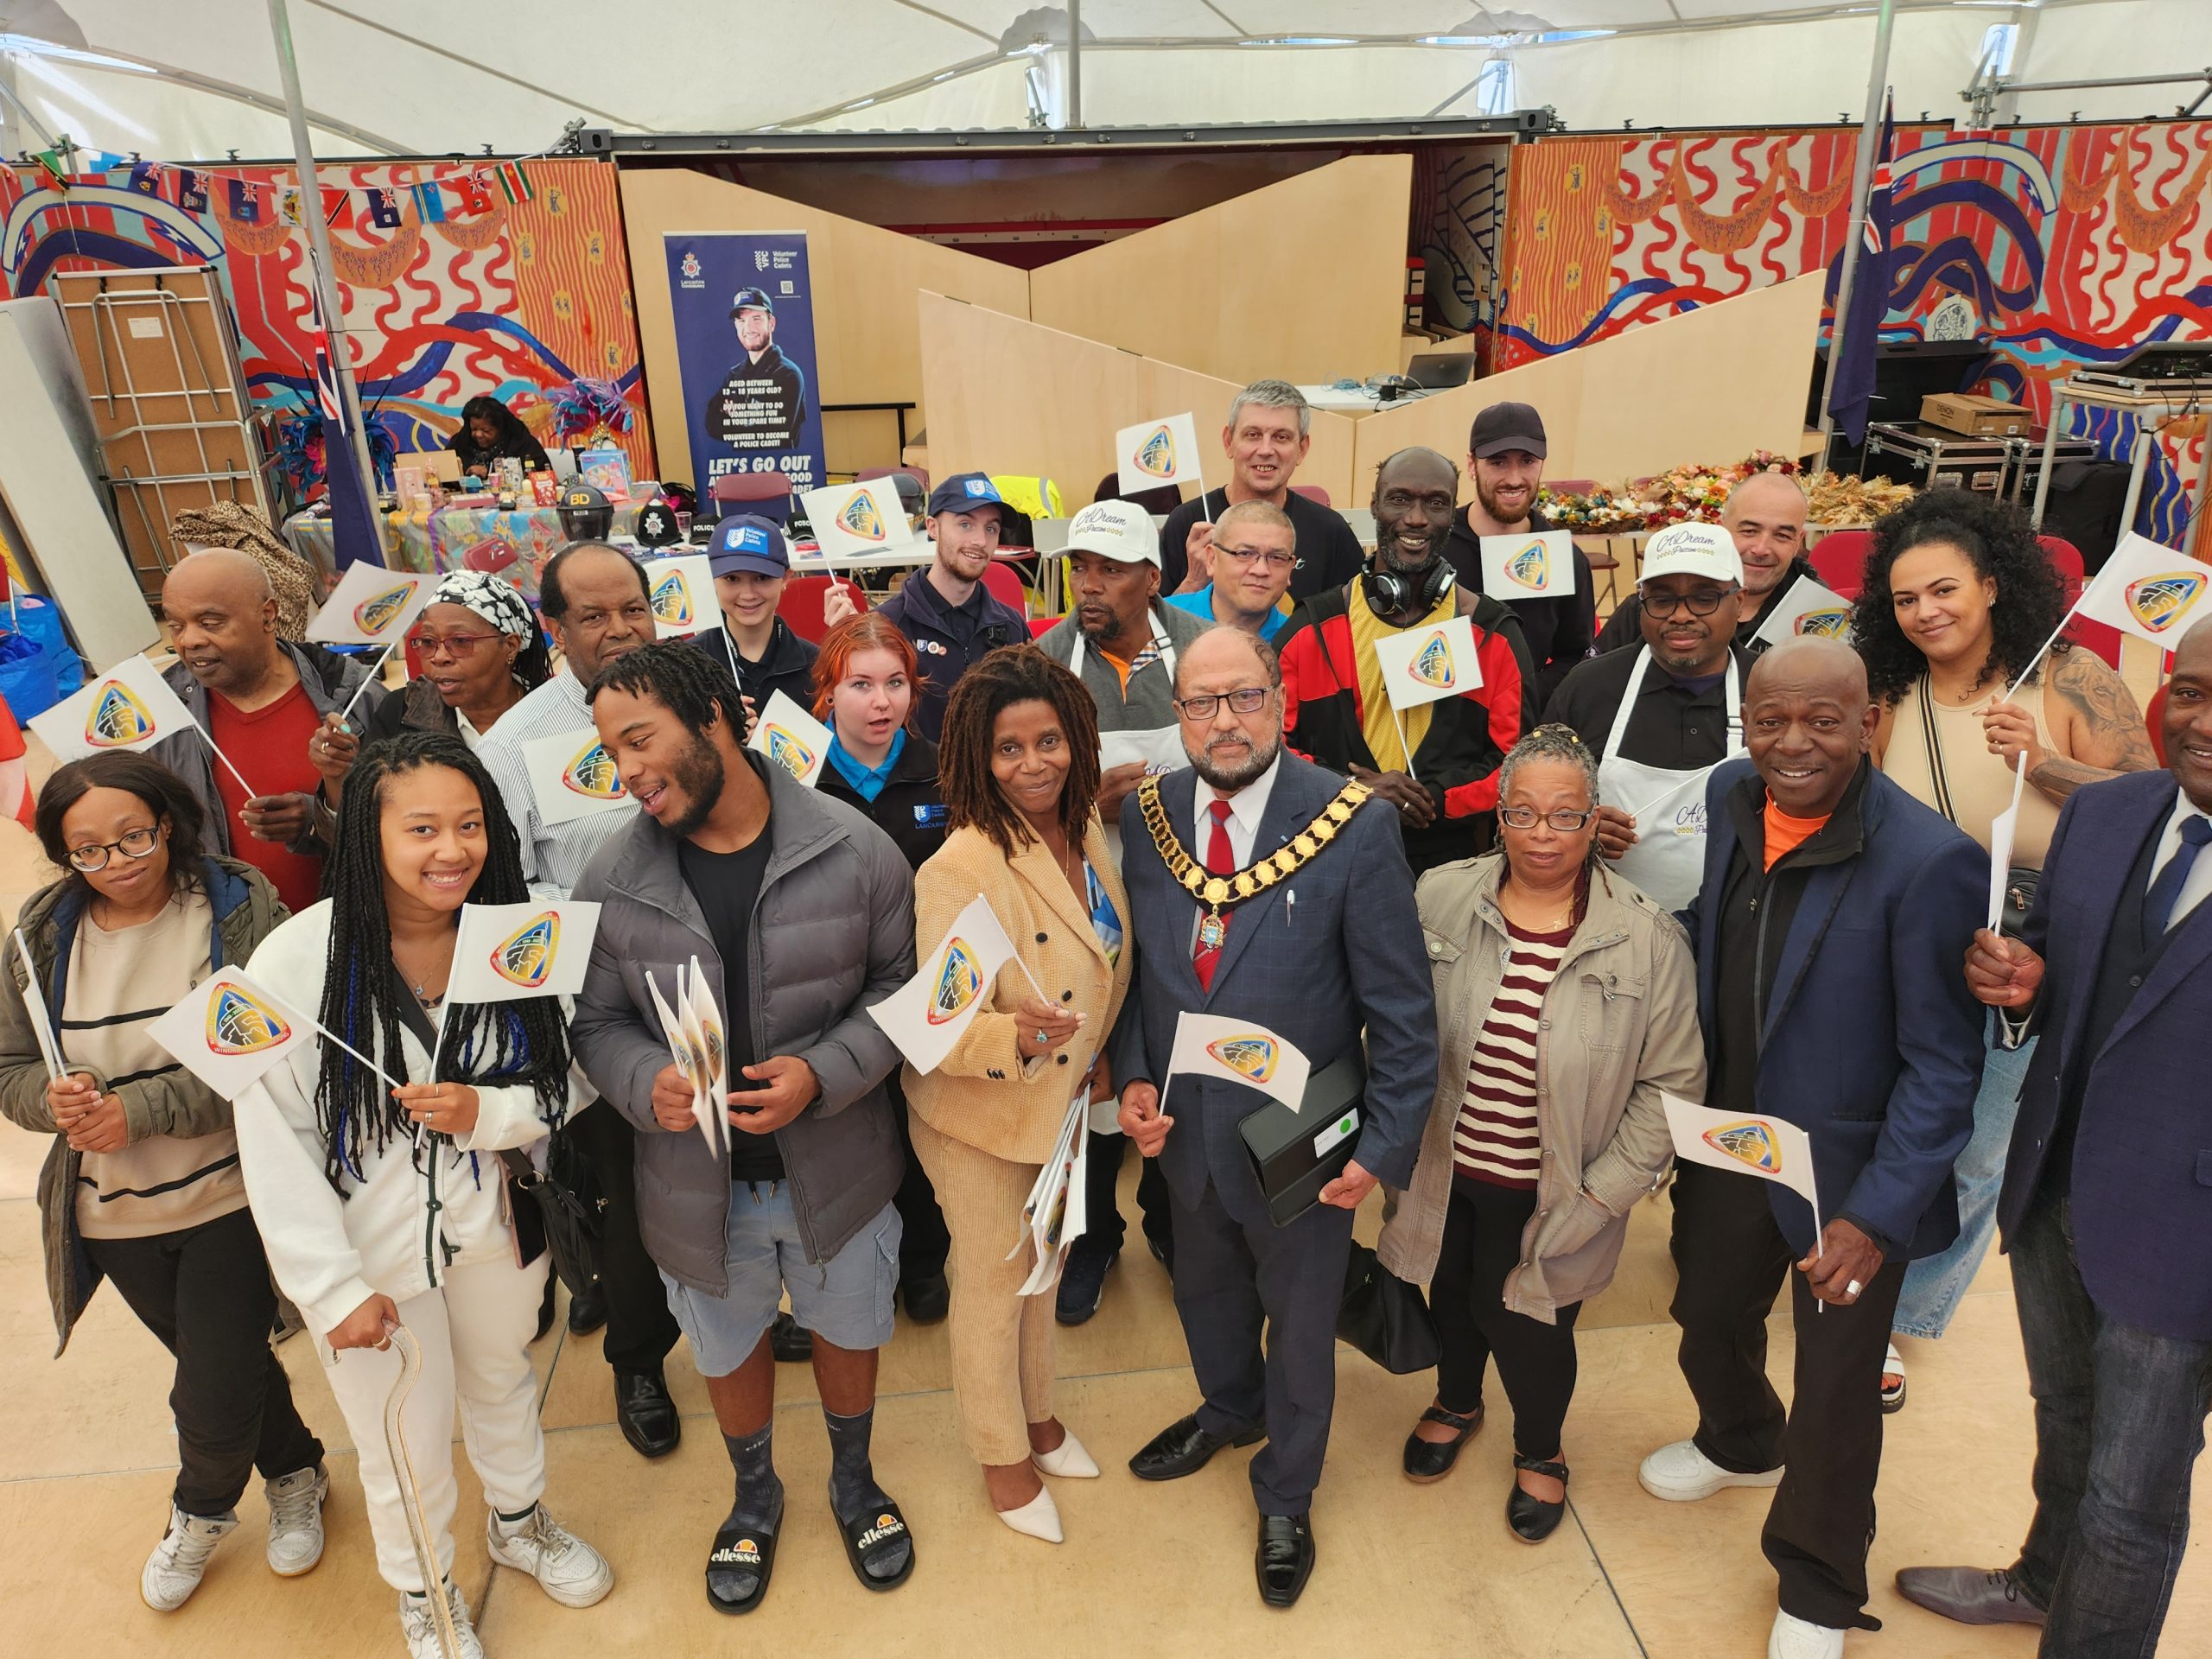 A group photograph of attendees at a Windrush celebration event at the MET.